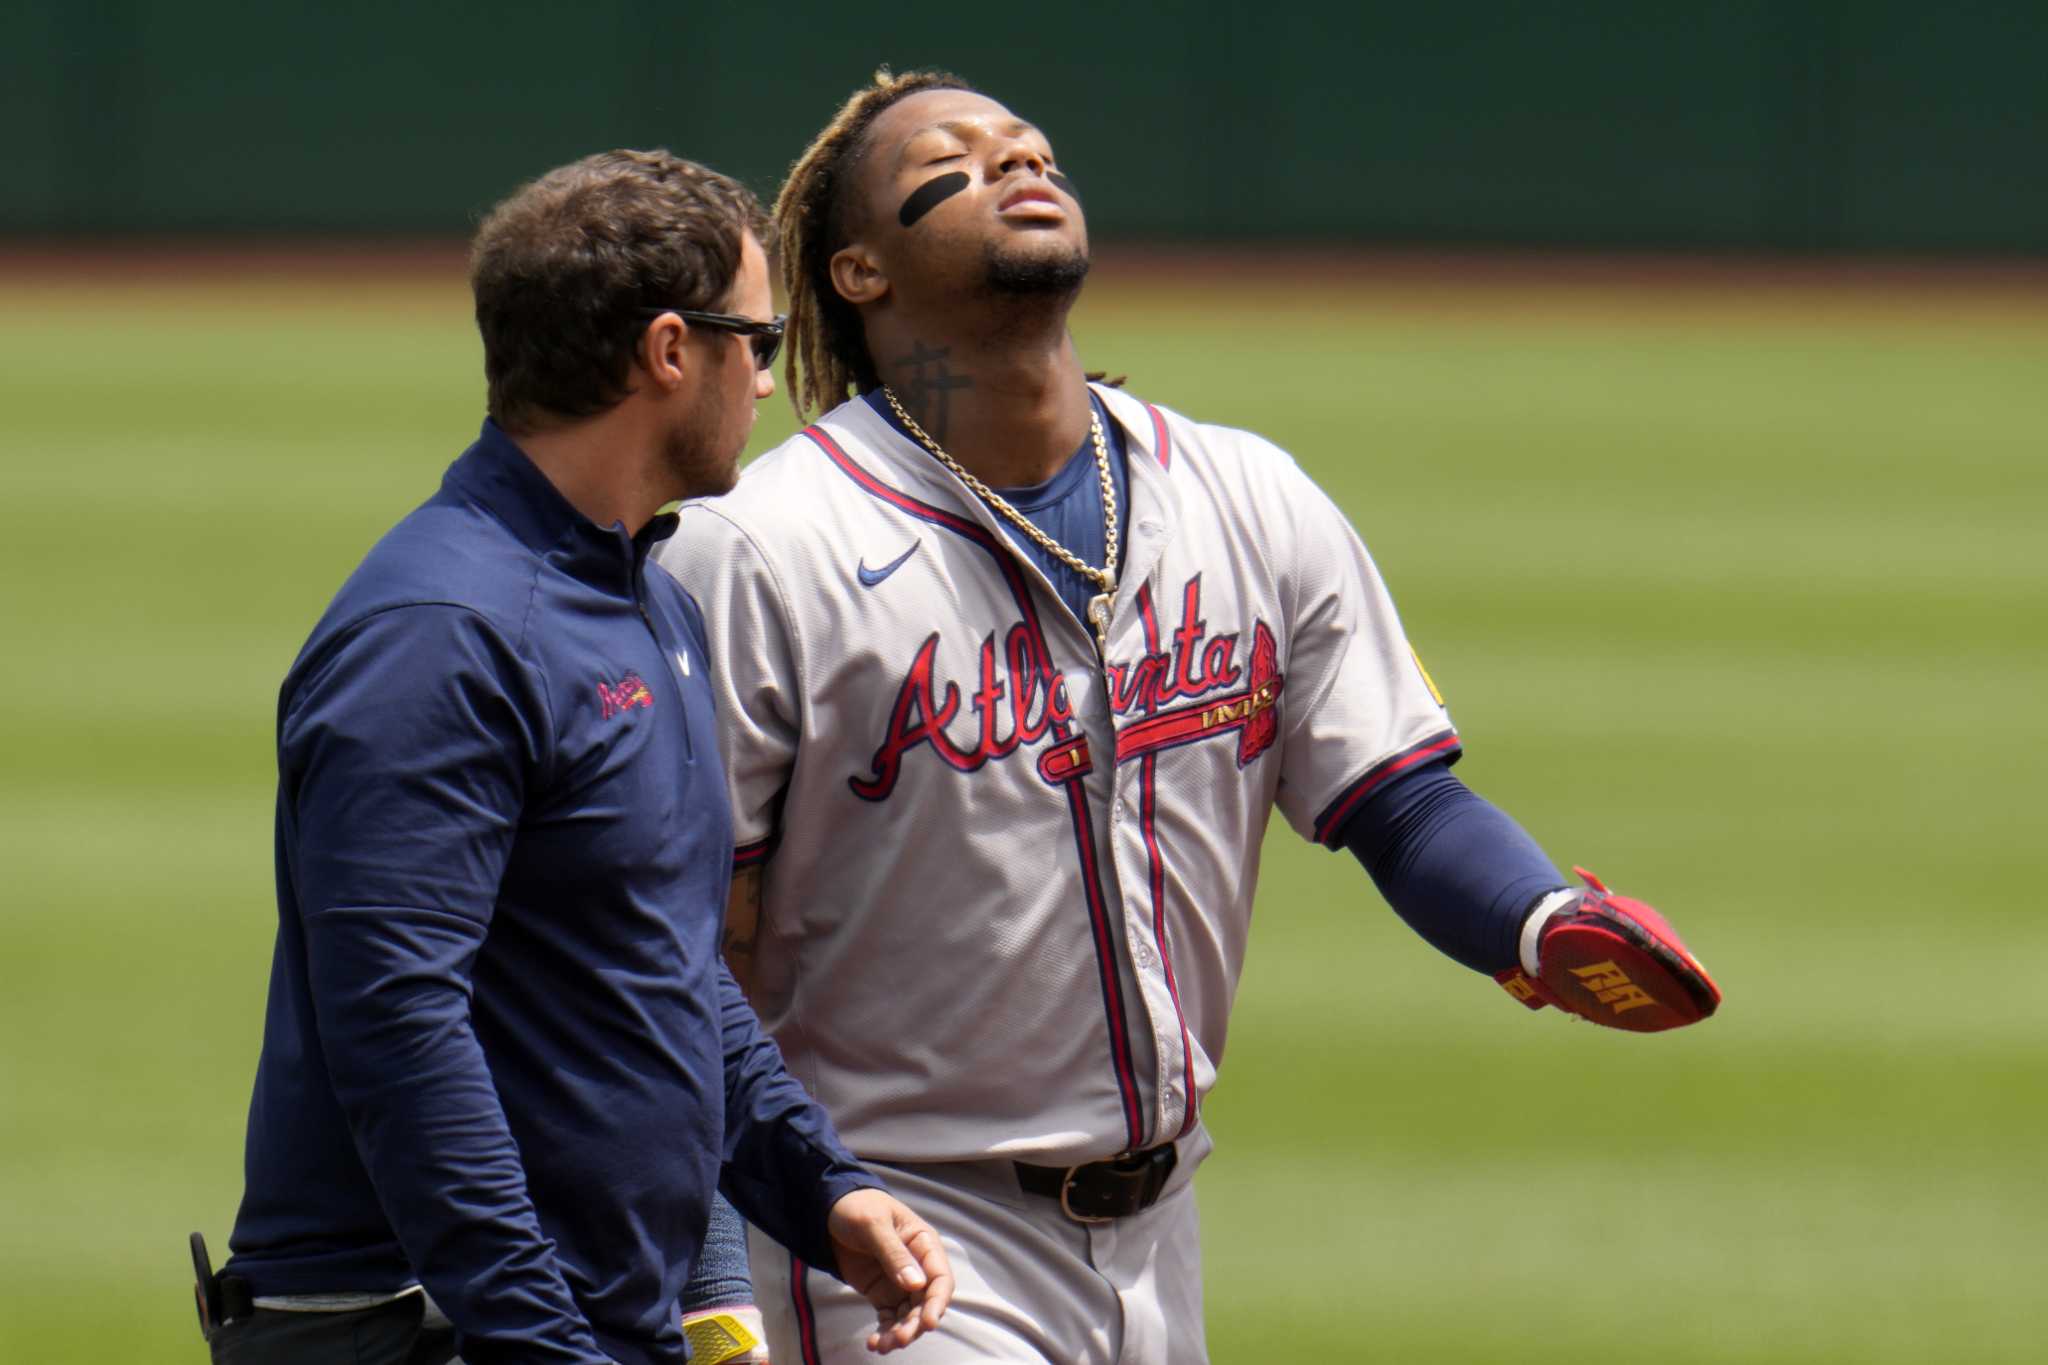 Resetting the division races: Acuña's injury, Phillies' fast start puts Braves' streak in jeopardy